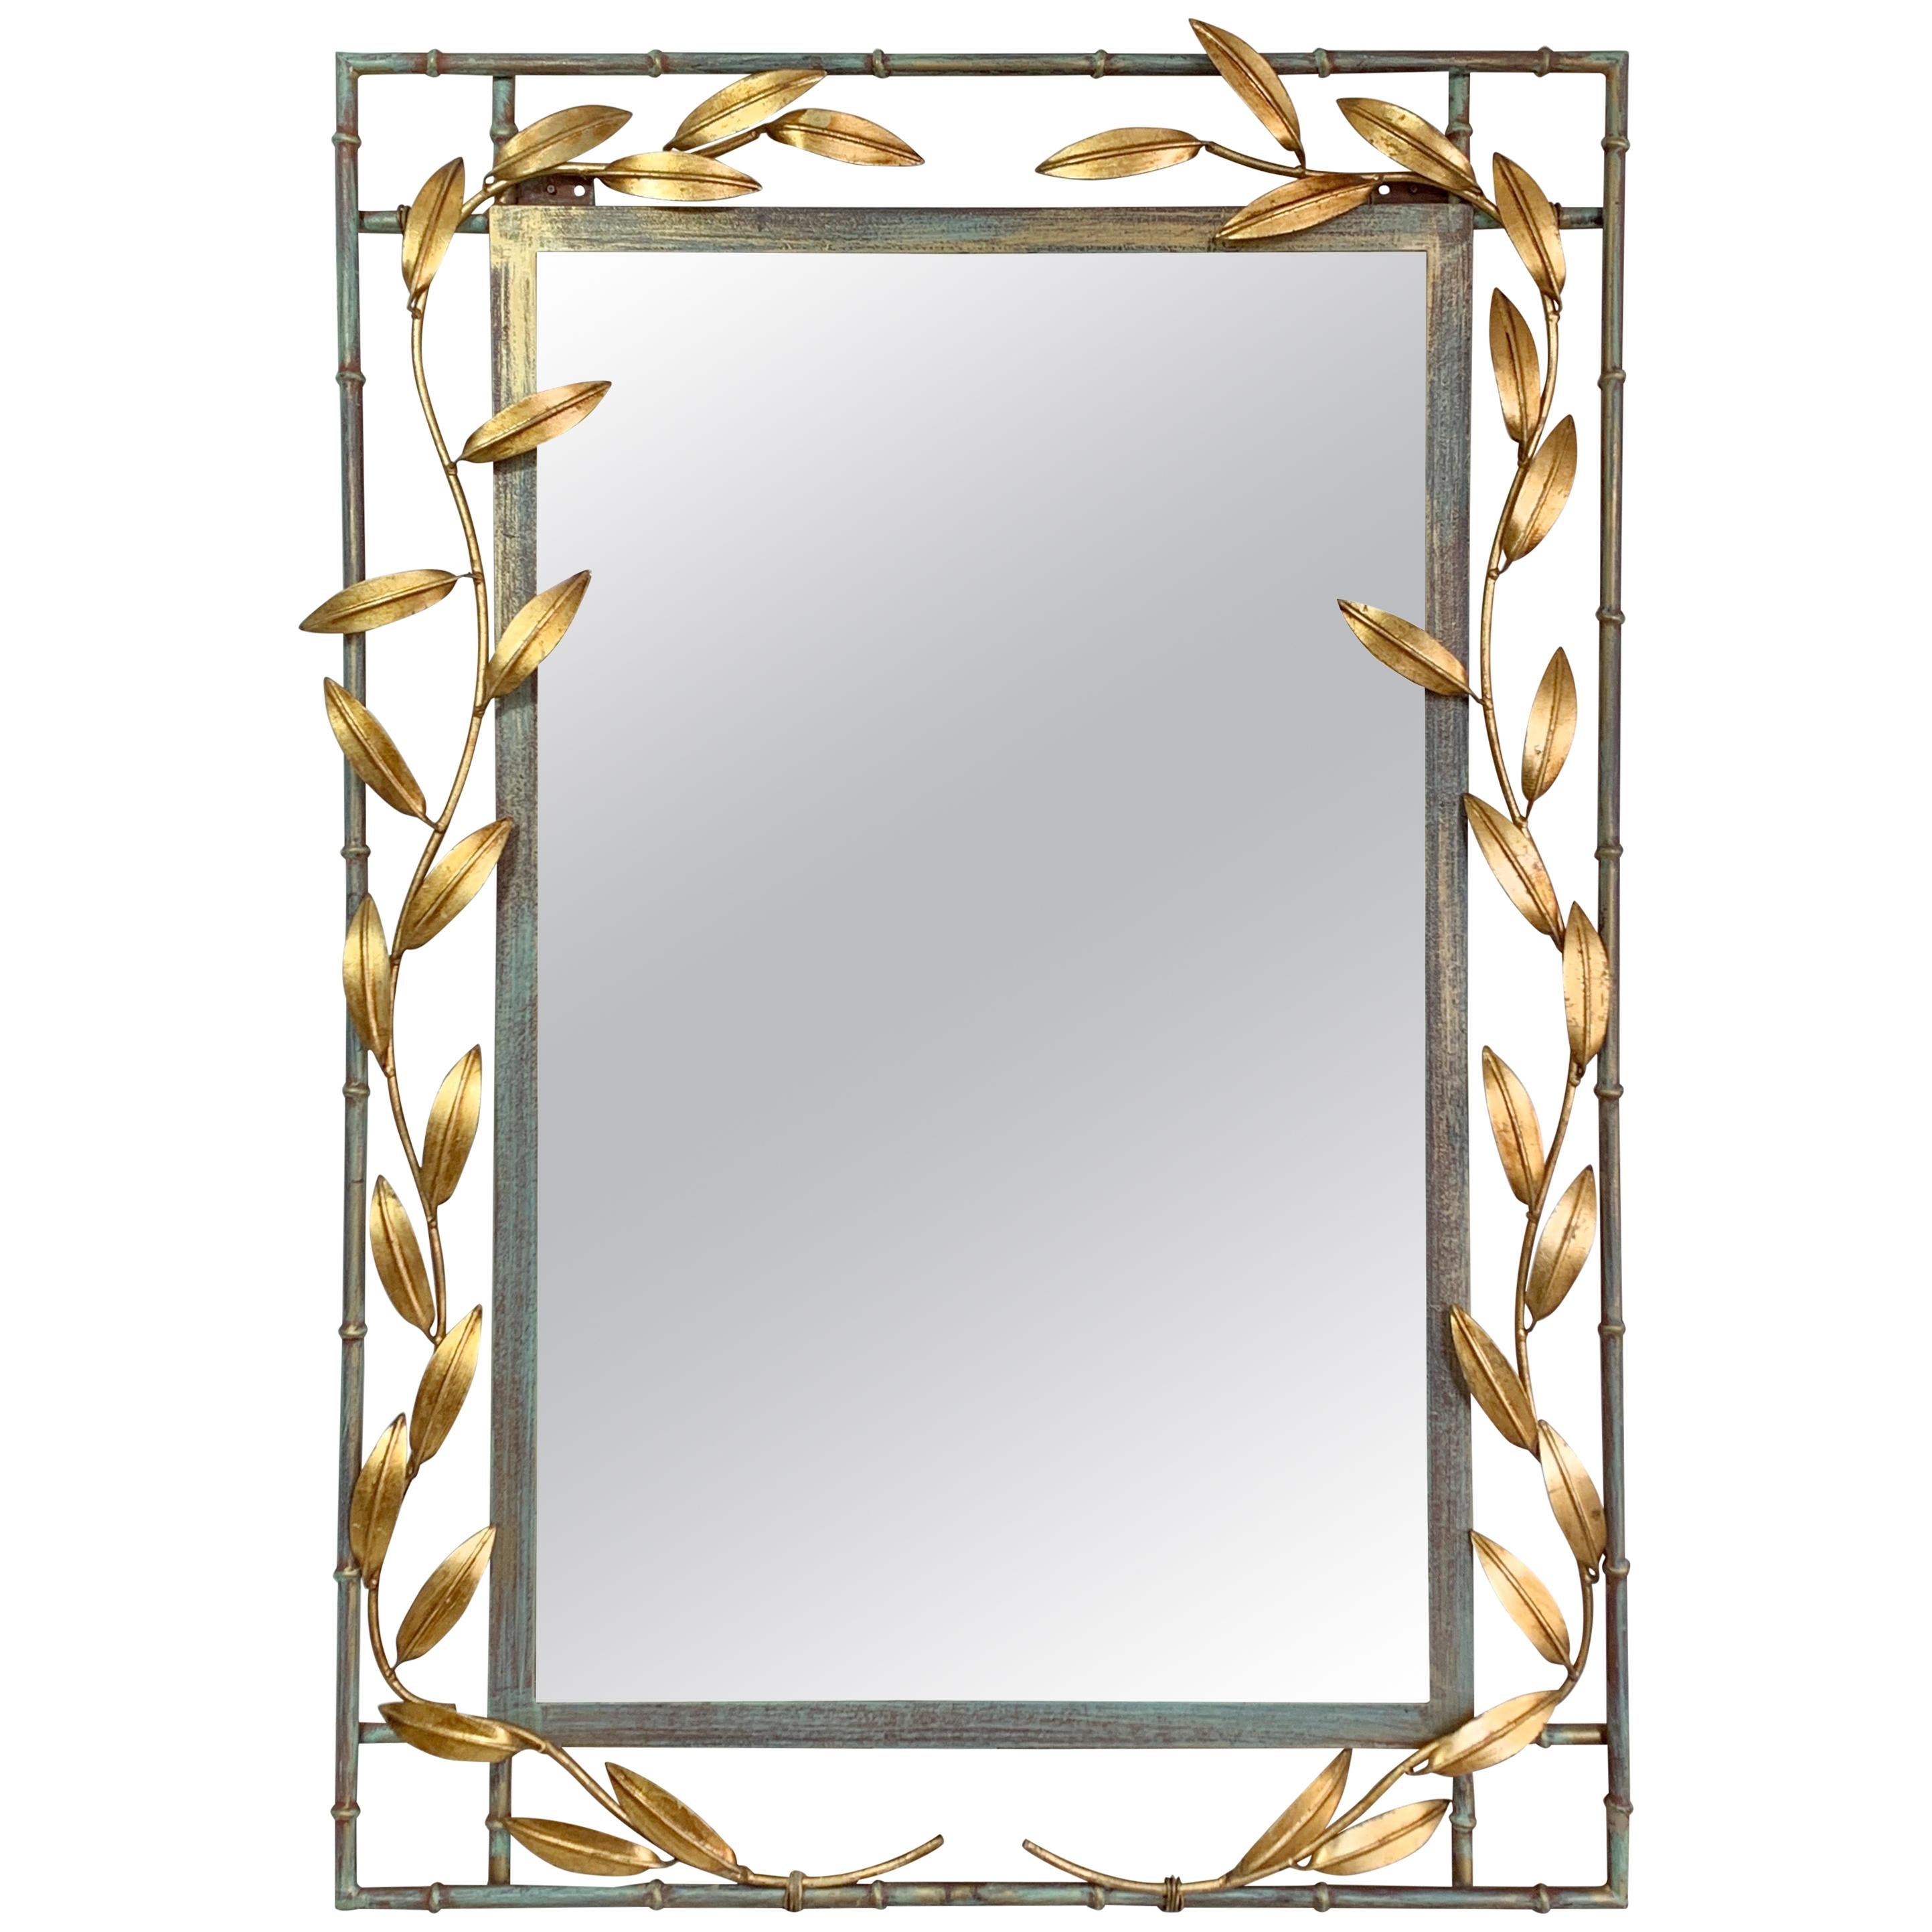 Decorative Gilt Leaf and Faux Bamboo Mirror